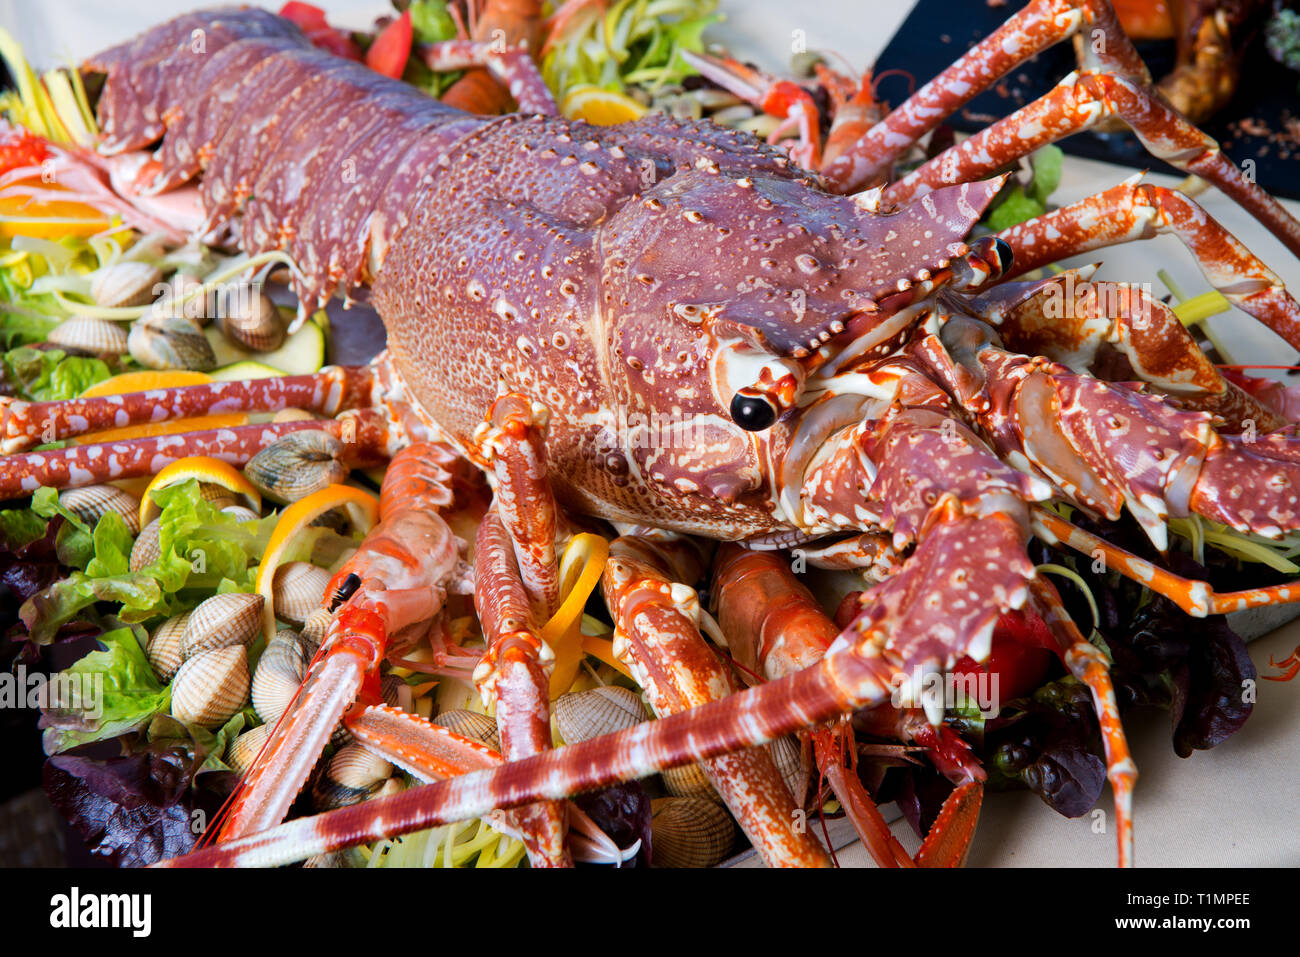 Live lobster on tray with cockles and lettuce Stock Photo